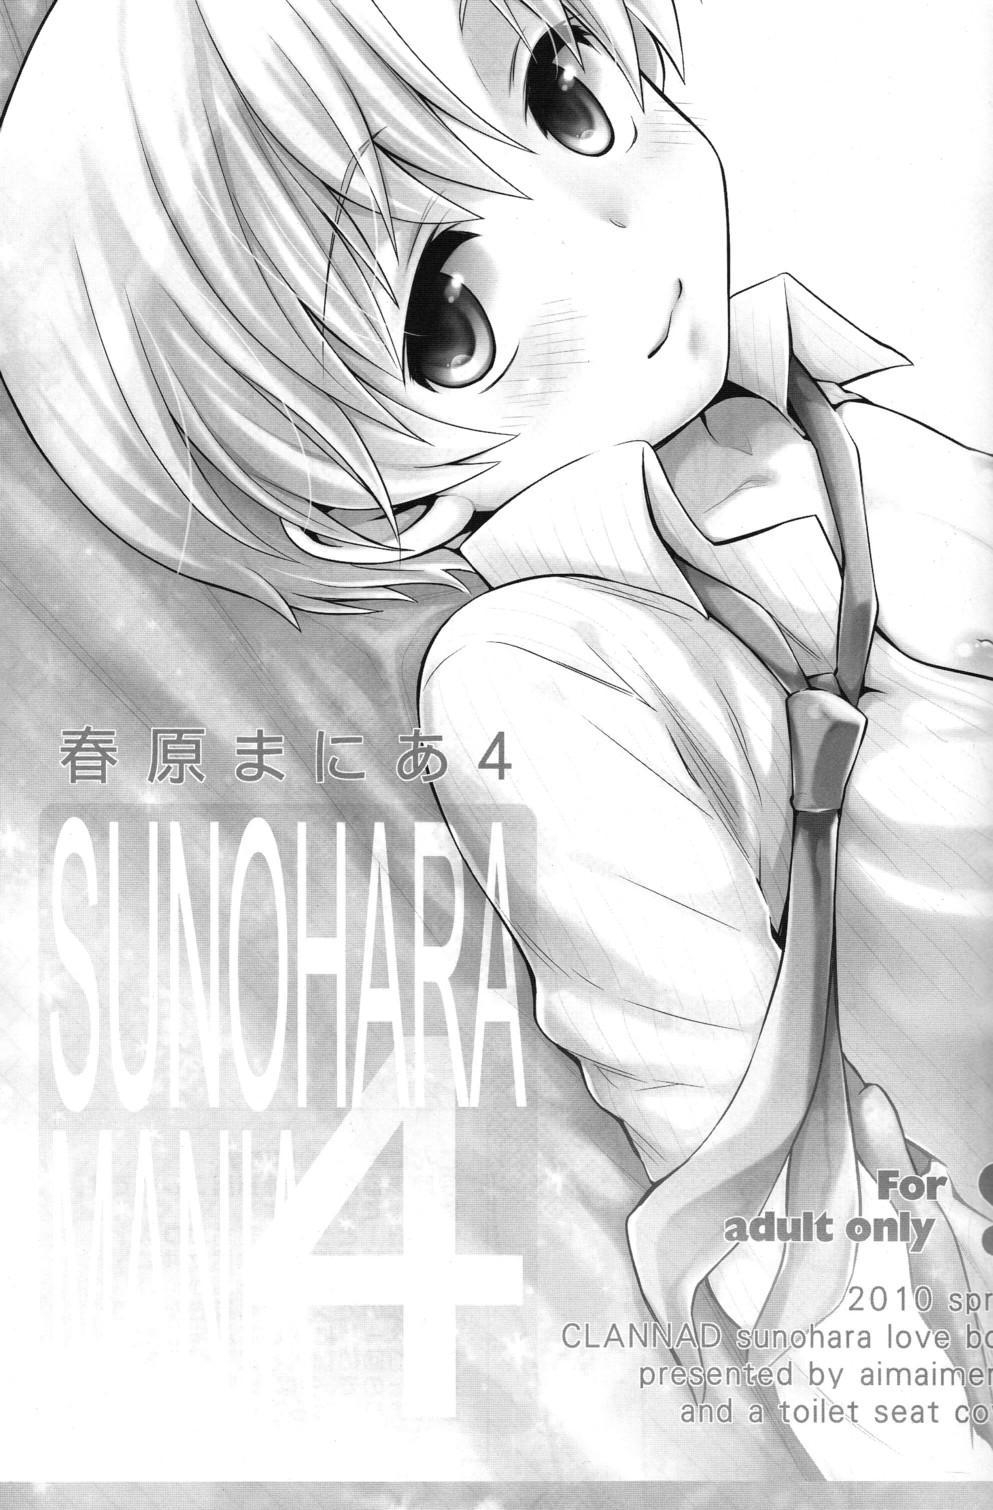 3some Sunohara Mania 4 - Clannad Thick - Picture 3